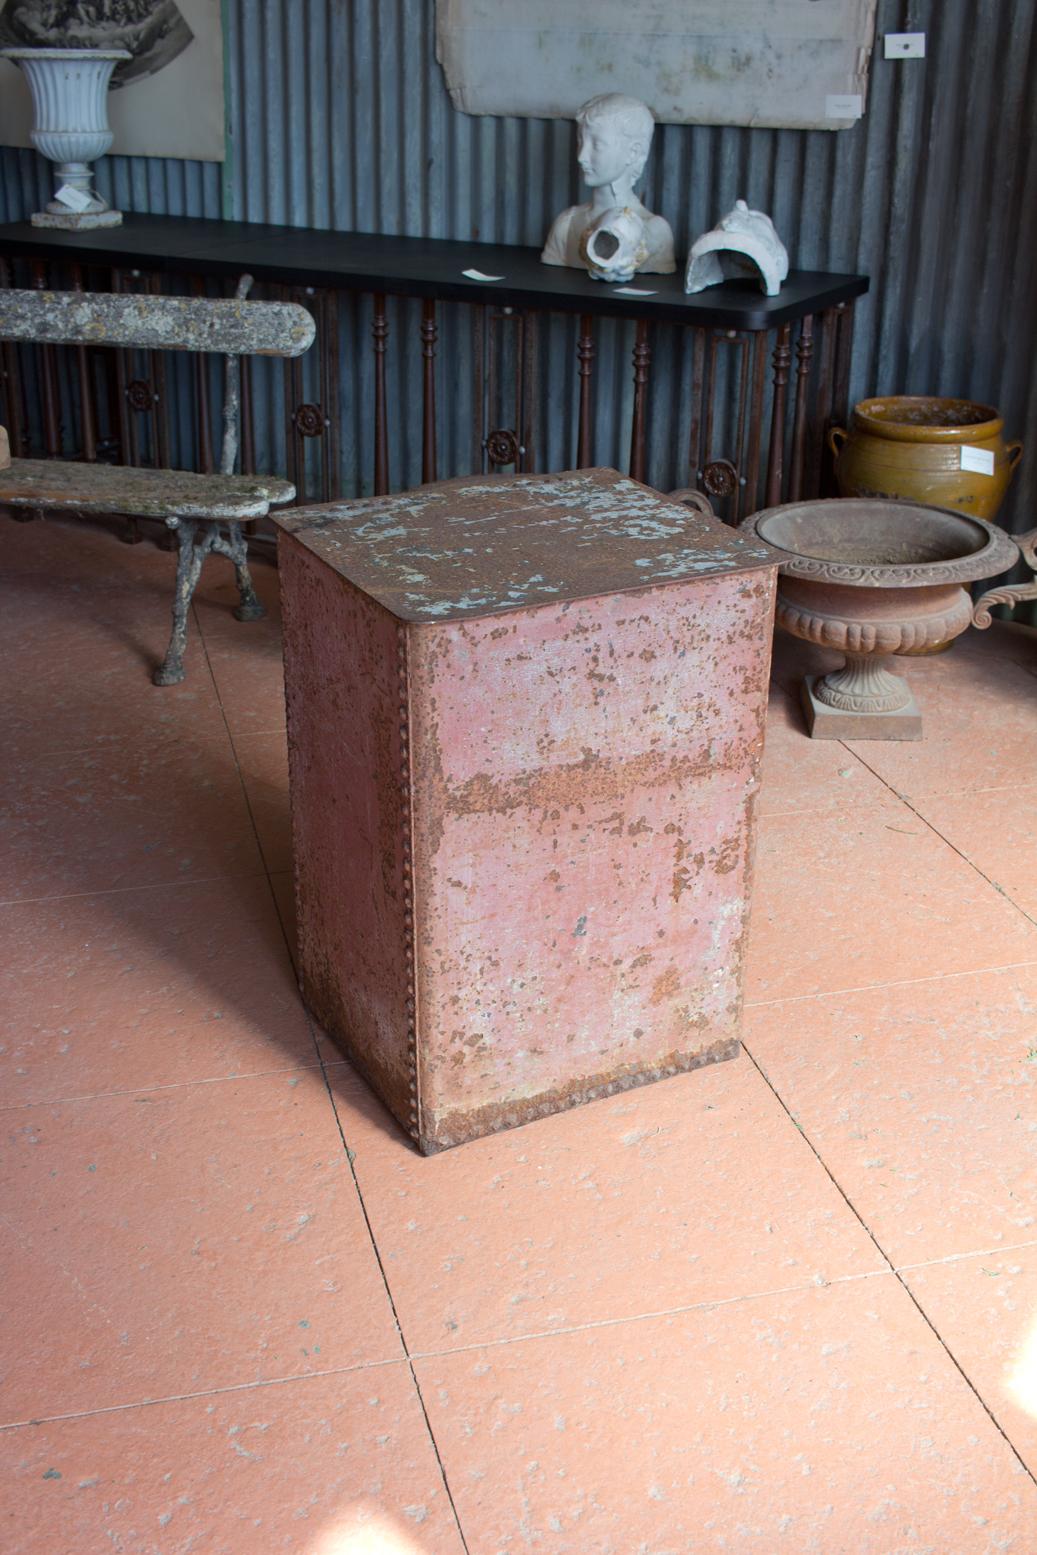 Substantial antique gauged and riveted metal container, possibly a log or coal box. Original paint residue.